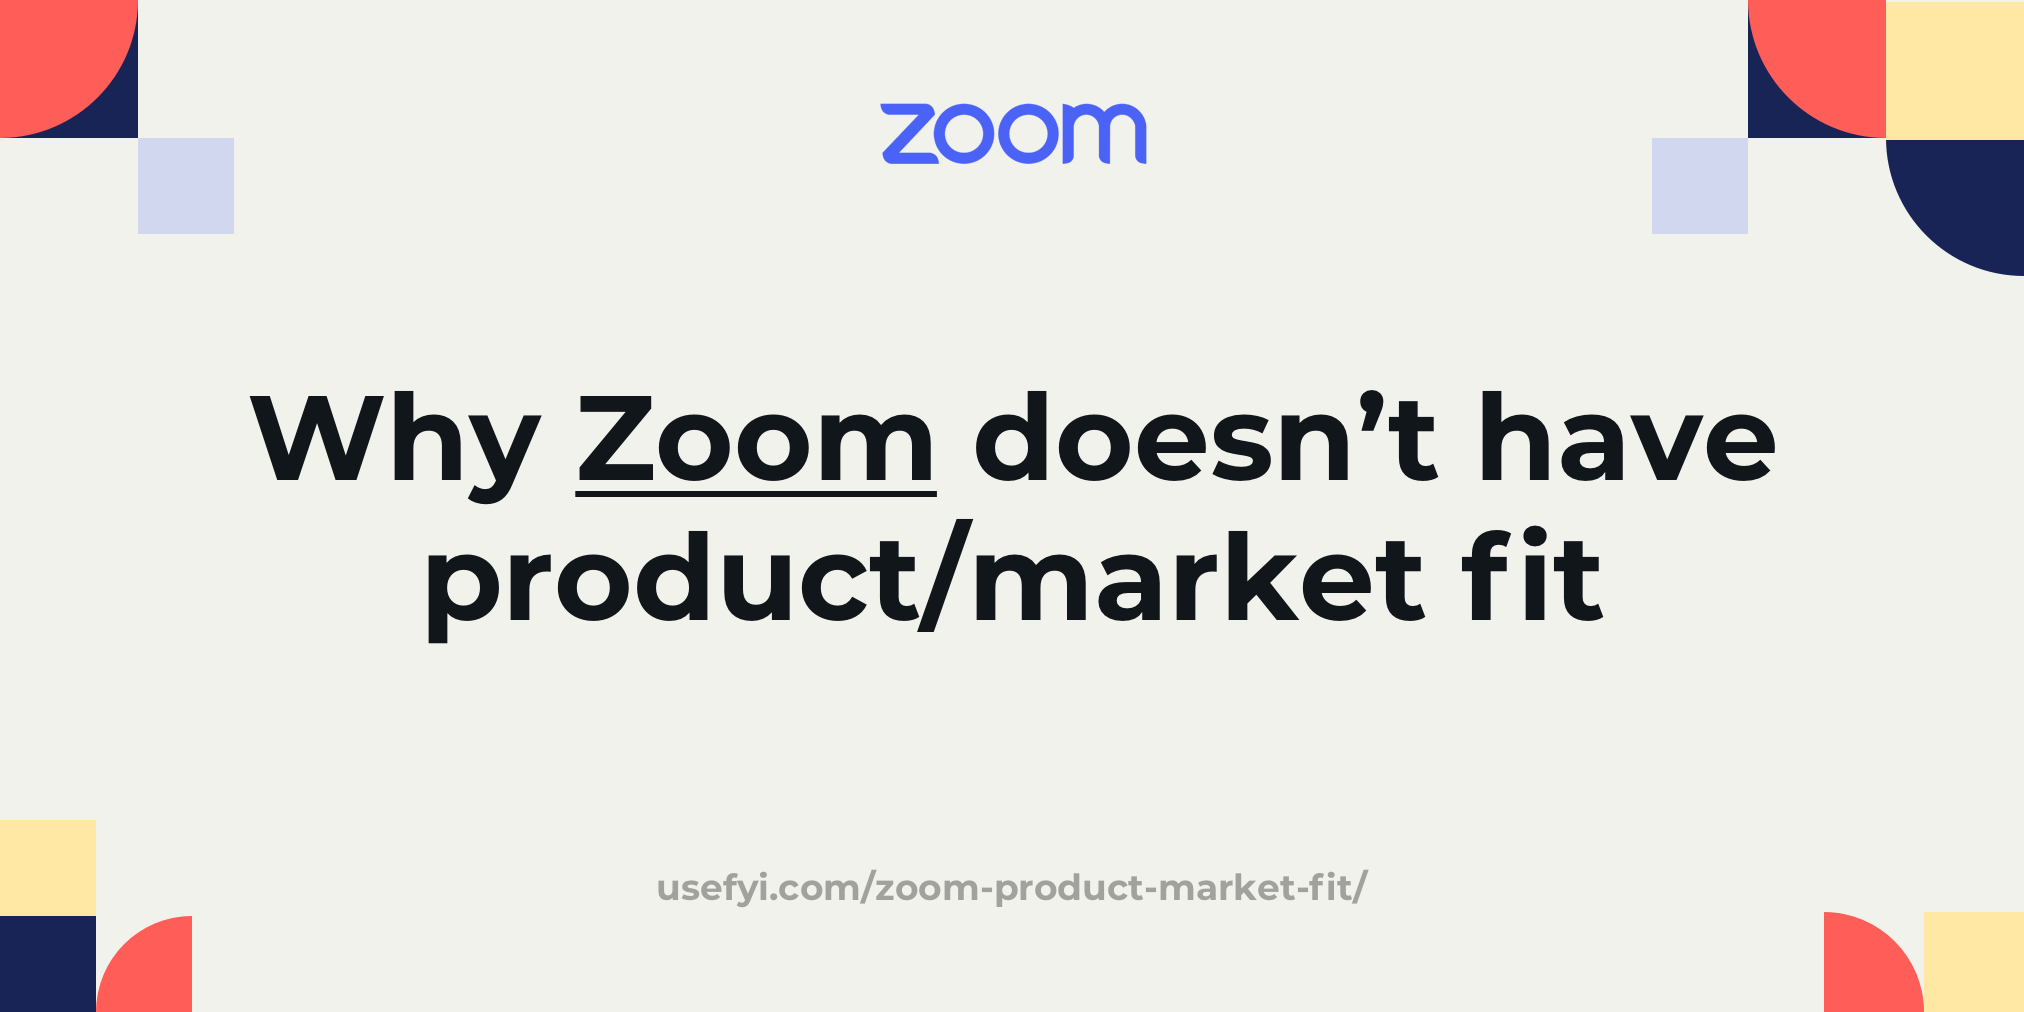 Why Zoom does not have product-market fit